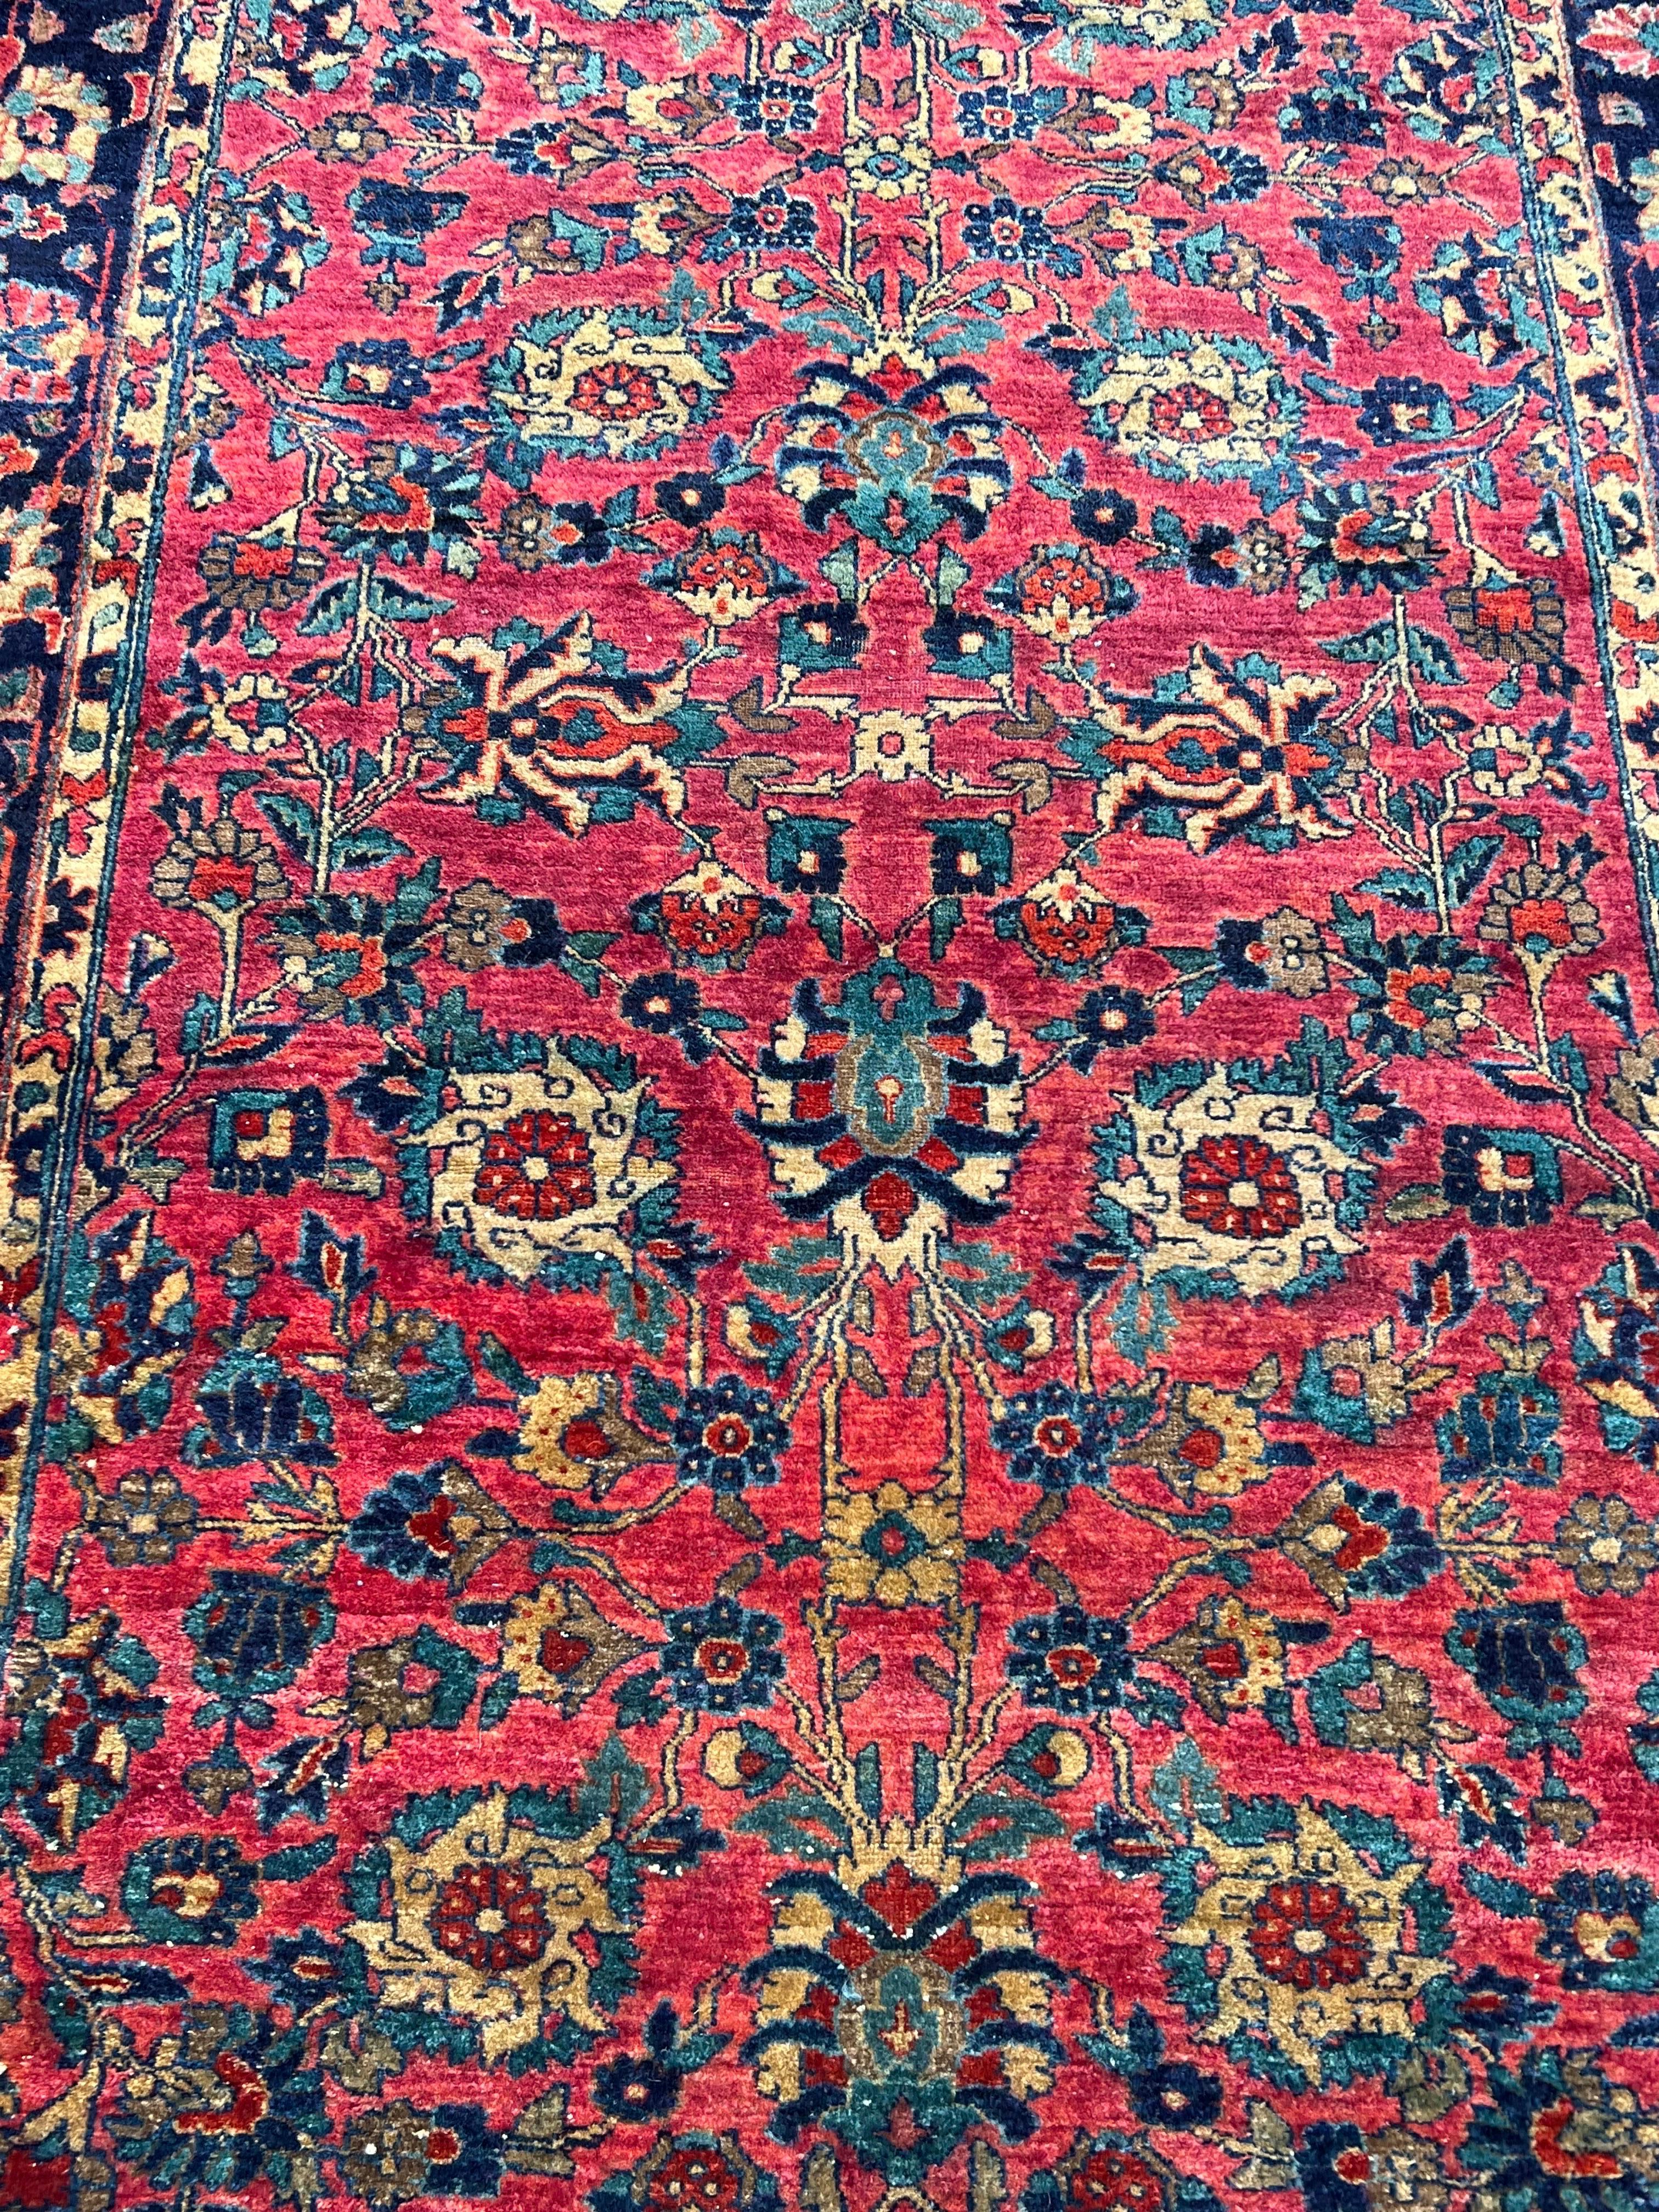 Vegetable Dyed Mid 20th Century Persian Rug. Gorgeous cranberry and cobalt colors with decorative medallion and floral border. Fringe is missing on edges. Hand woven wool.